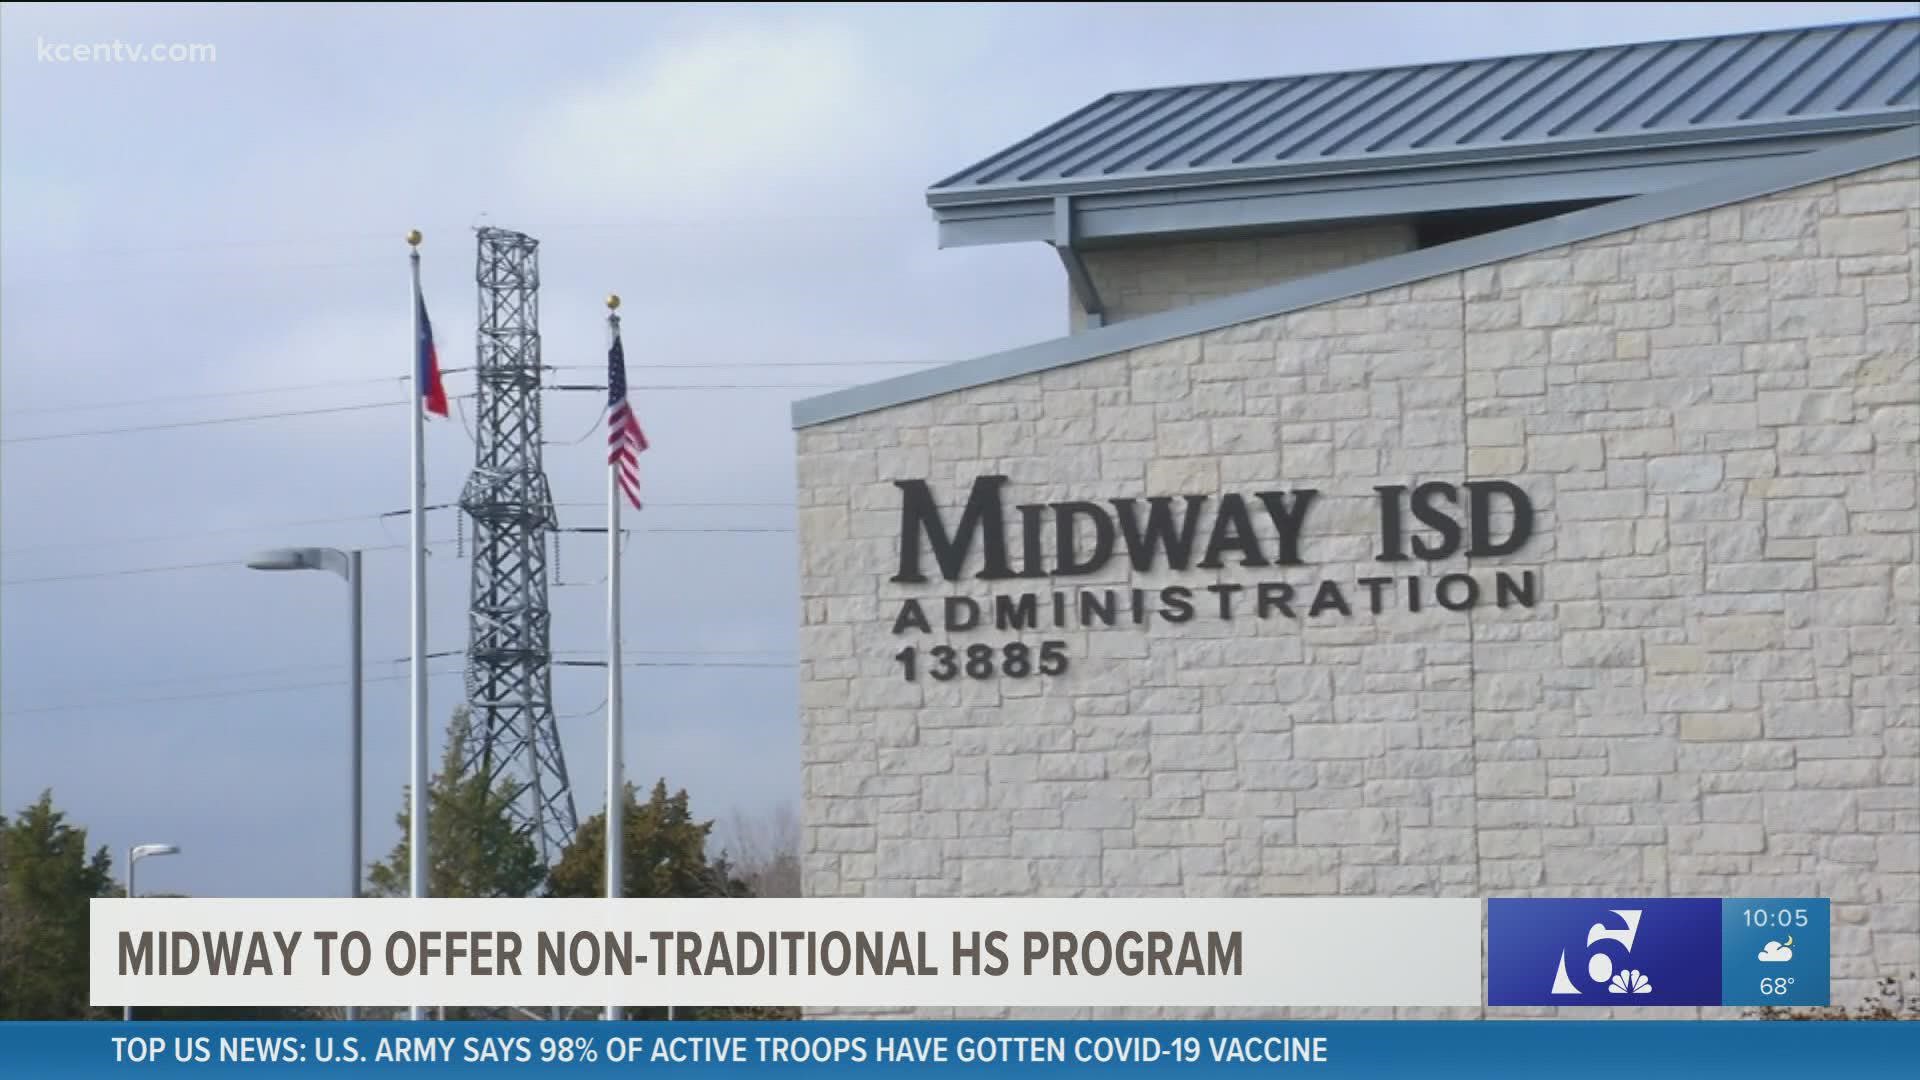 Midway ISD to offer a nontraditional experience